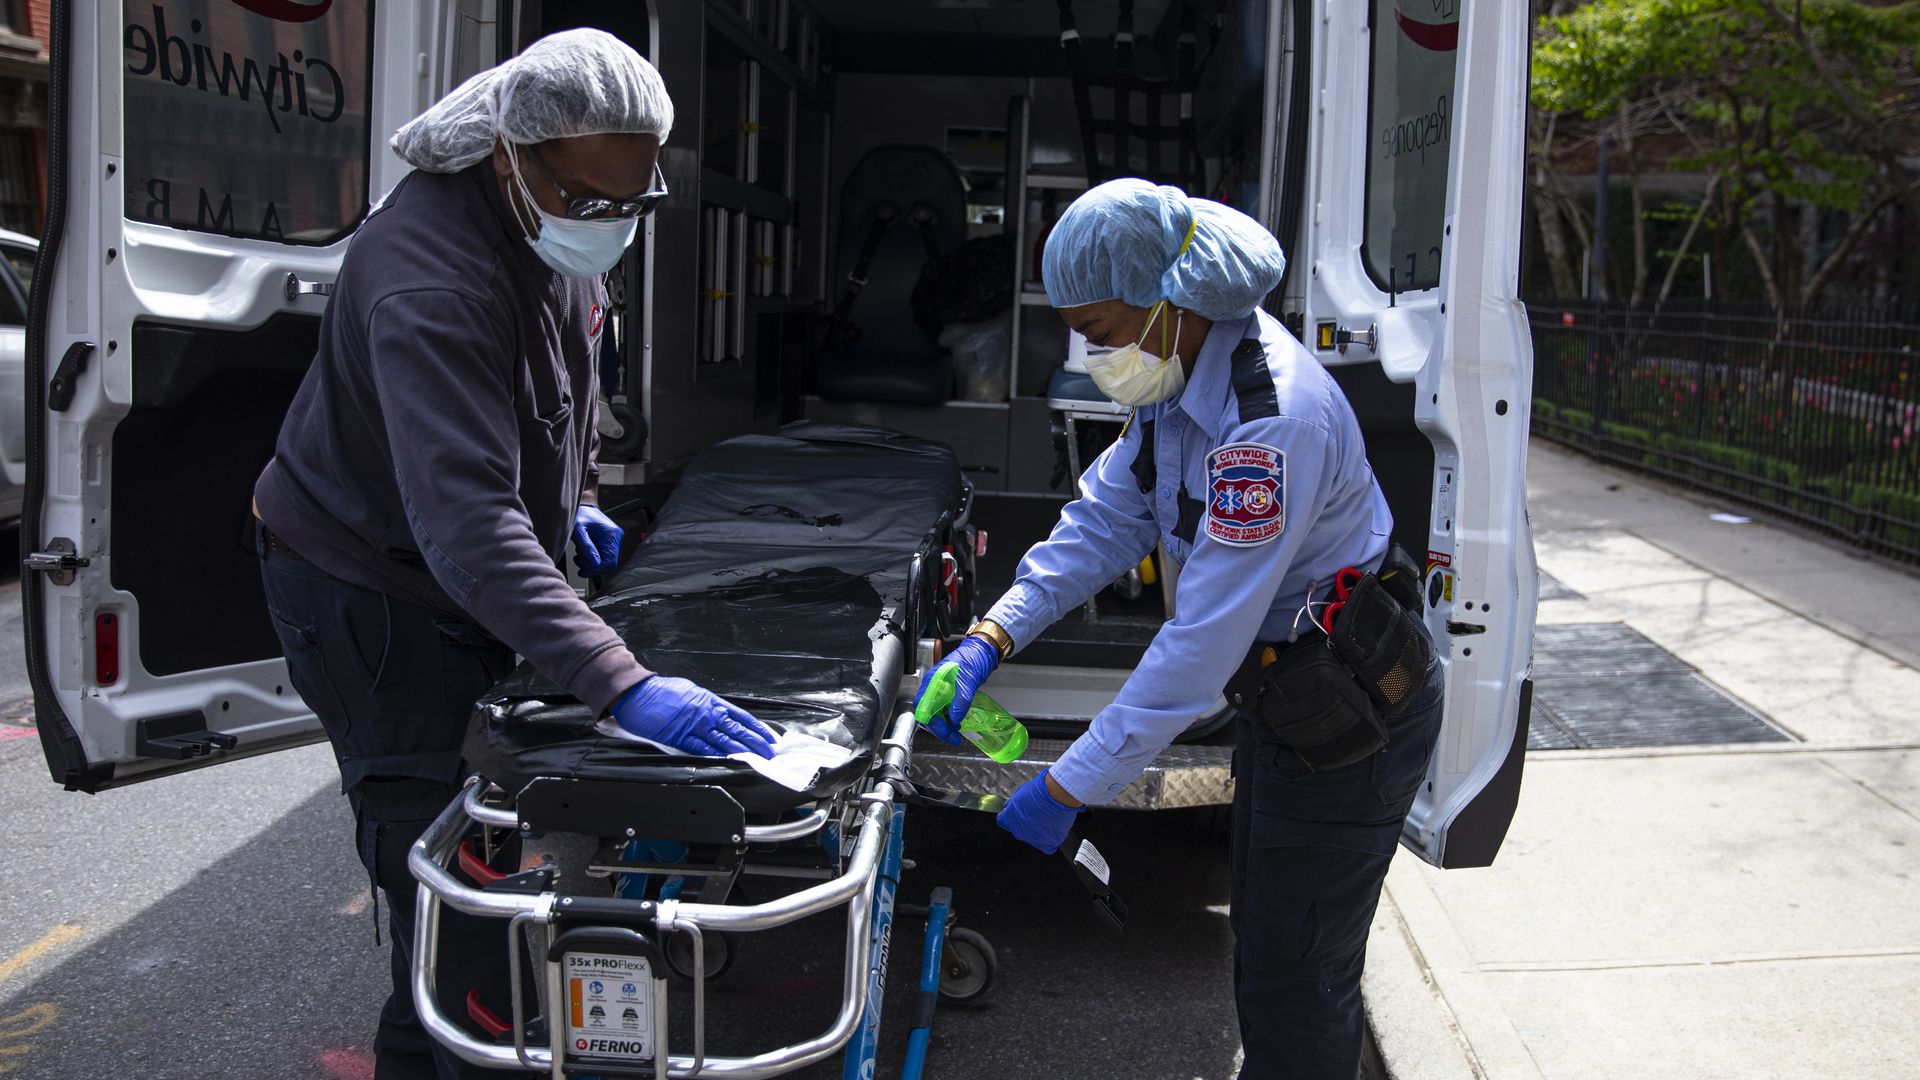 Two emergency medical staff of a private ambulance company sanitize a hospital gurney 